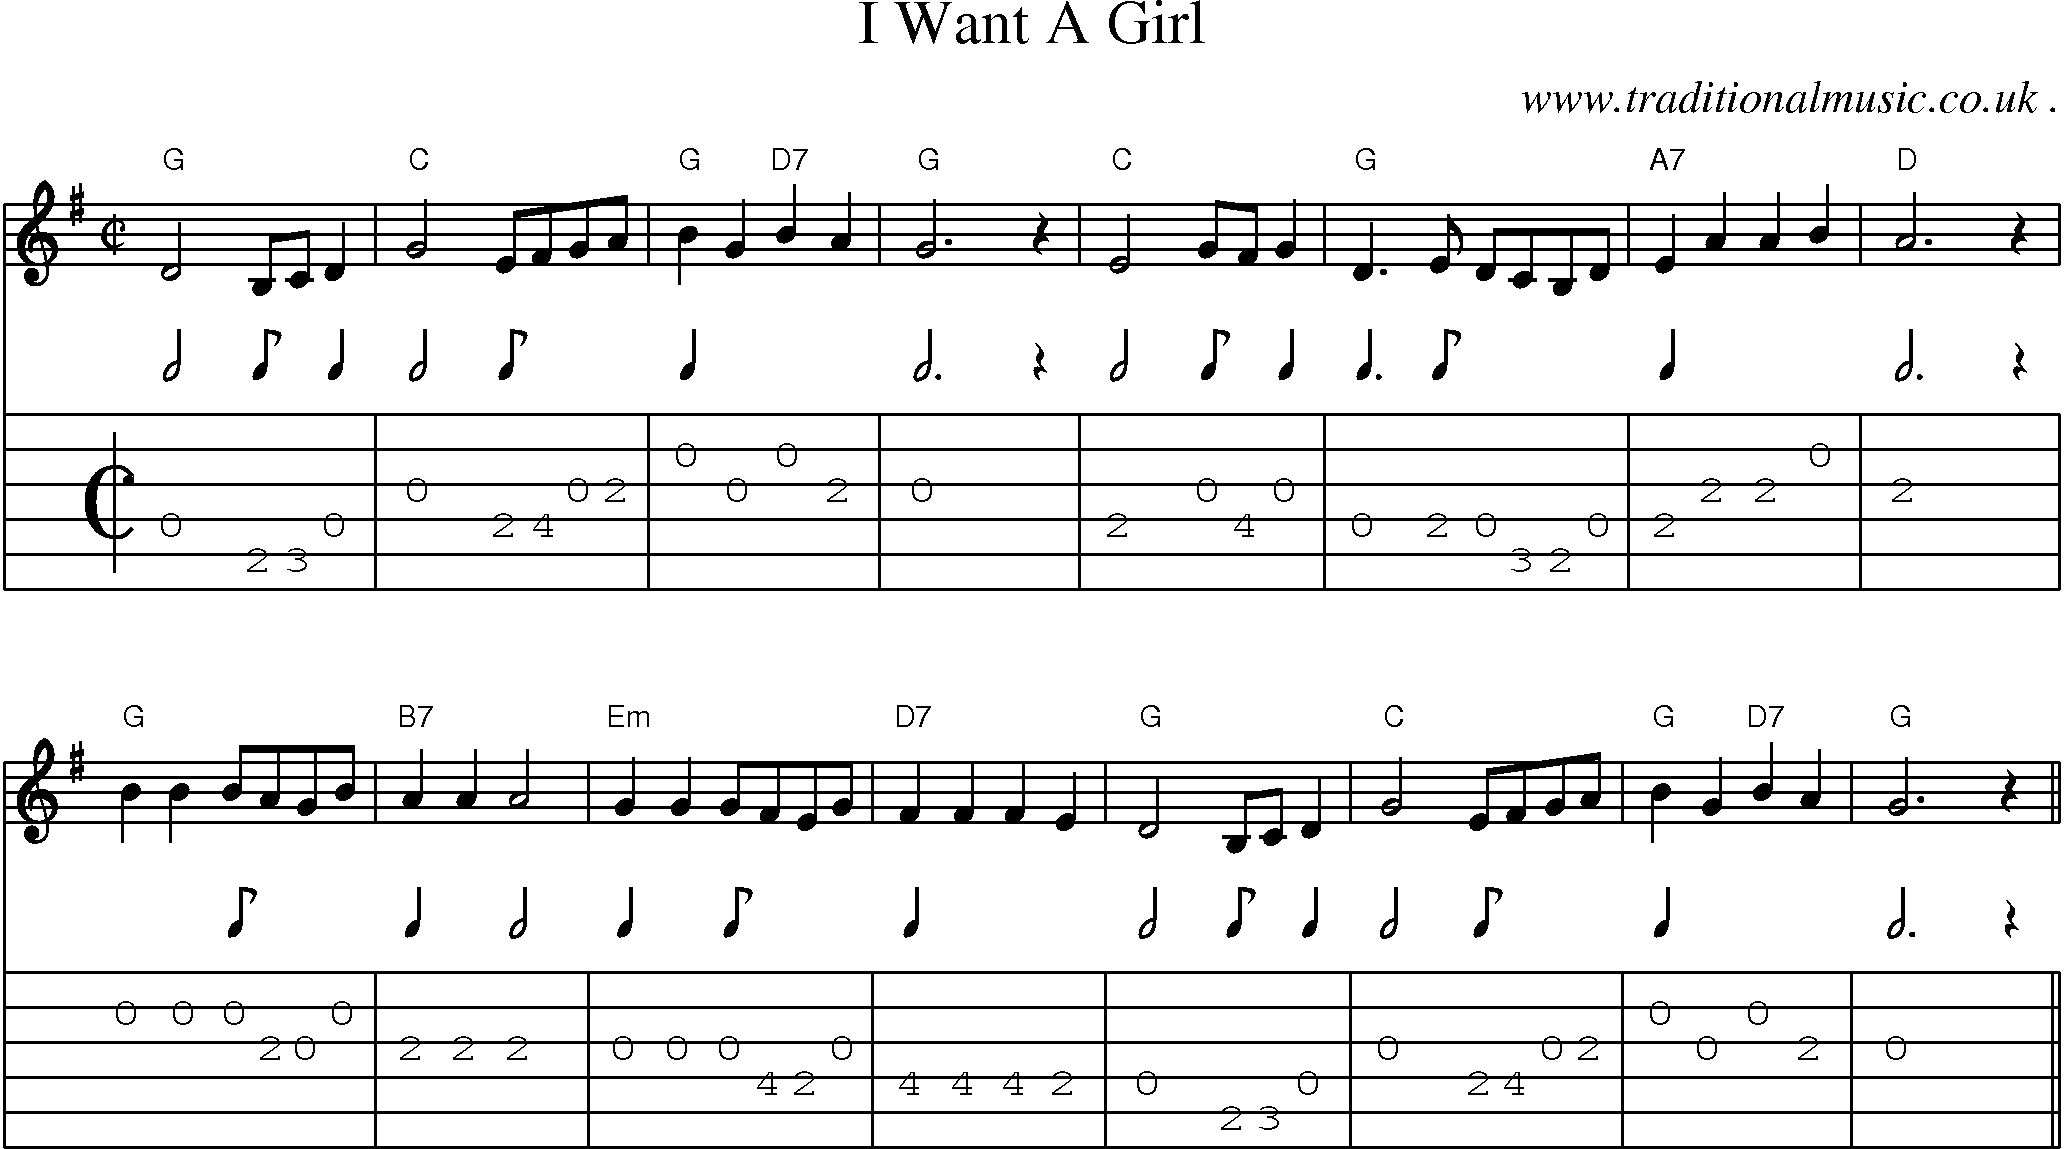 Music Score and Guitar Tabs for I Want A Girl